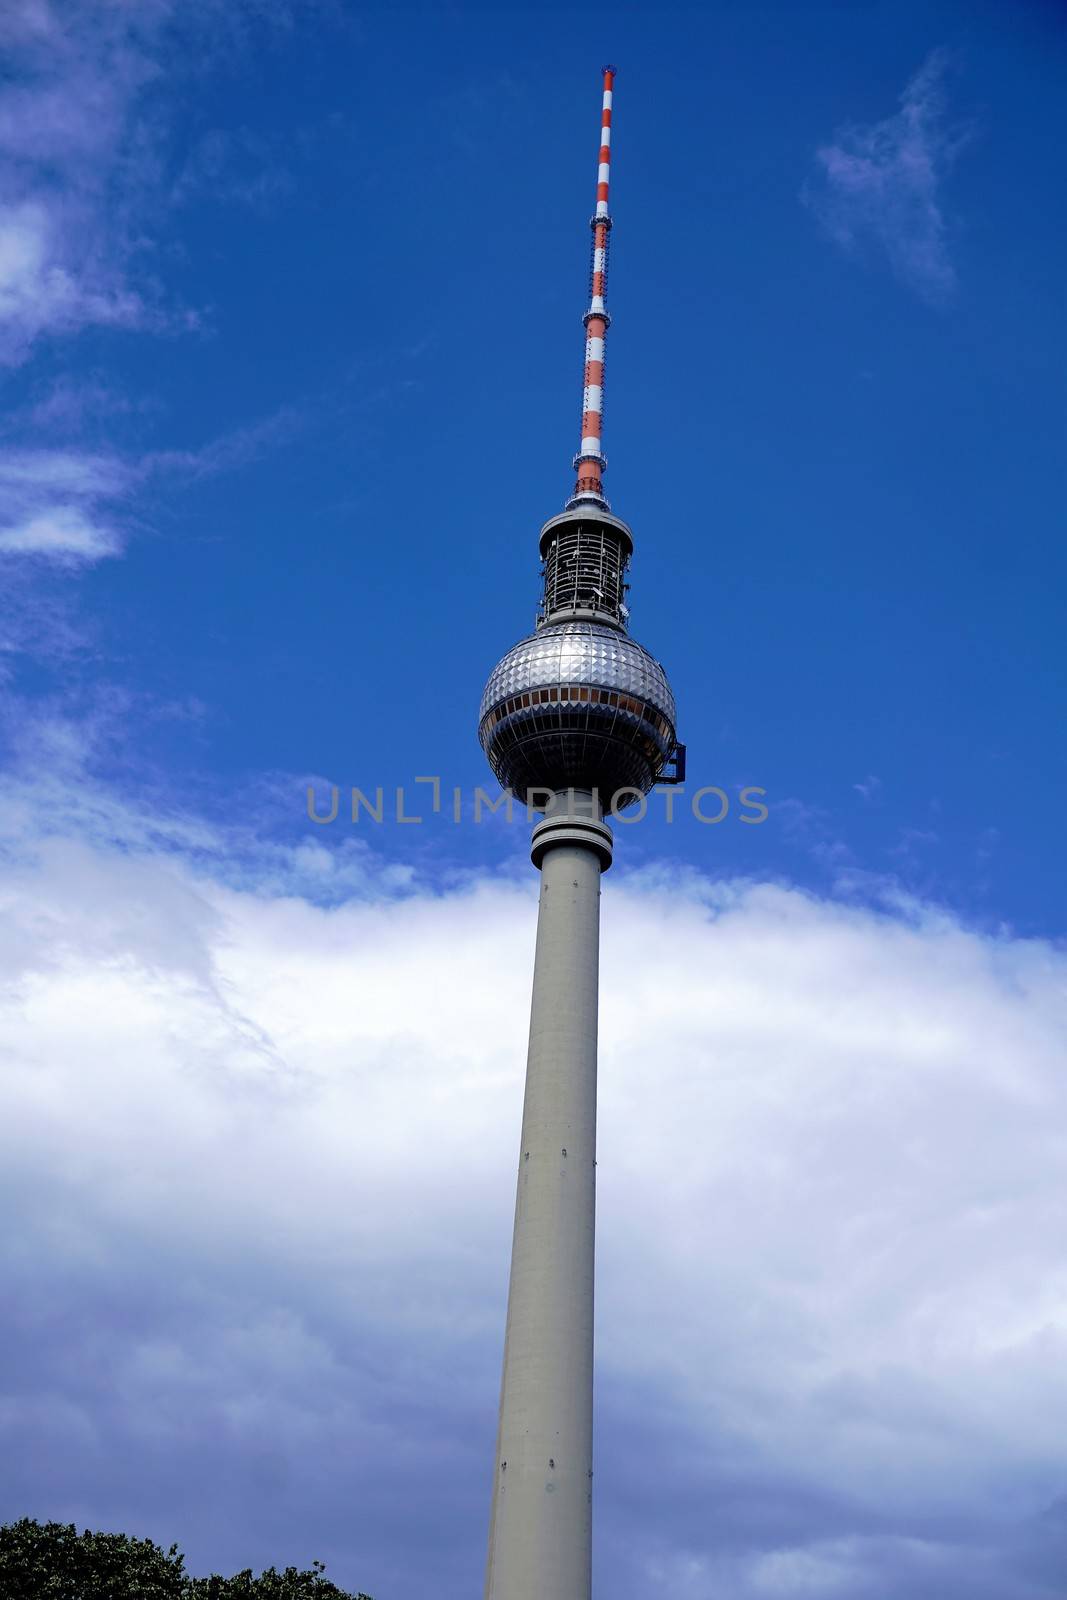 Berlin Fernsehturm with clouds and trees by pisces2386